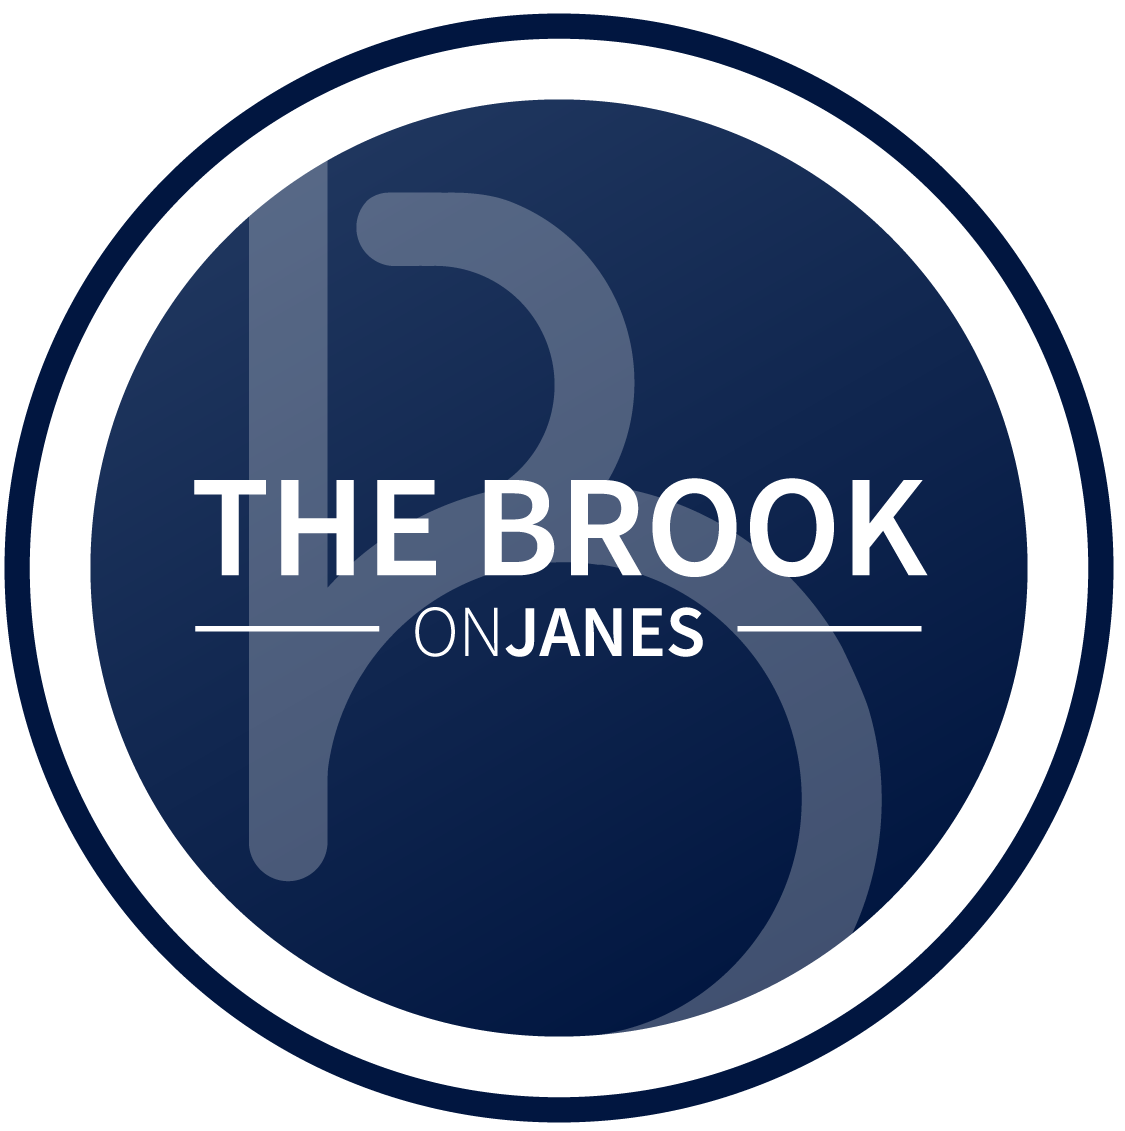 The Brook on Janes logo